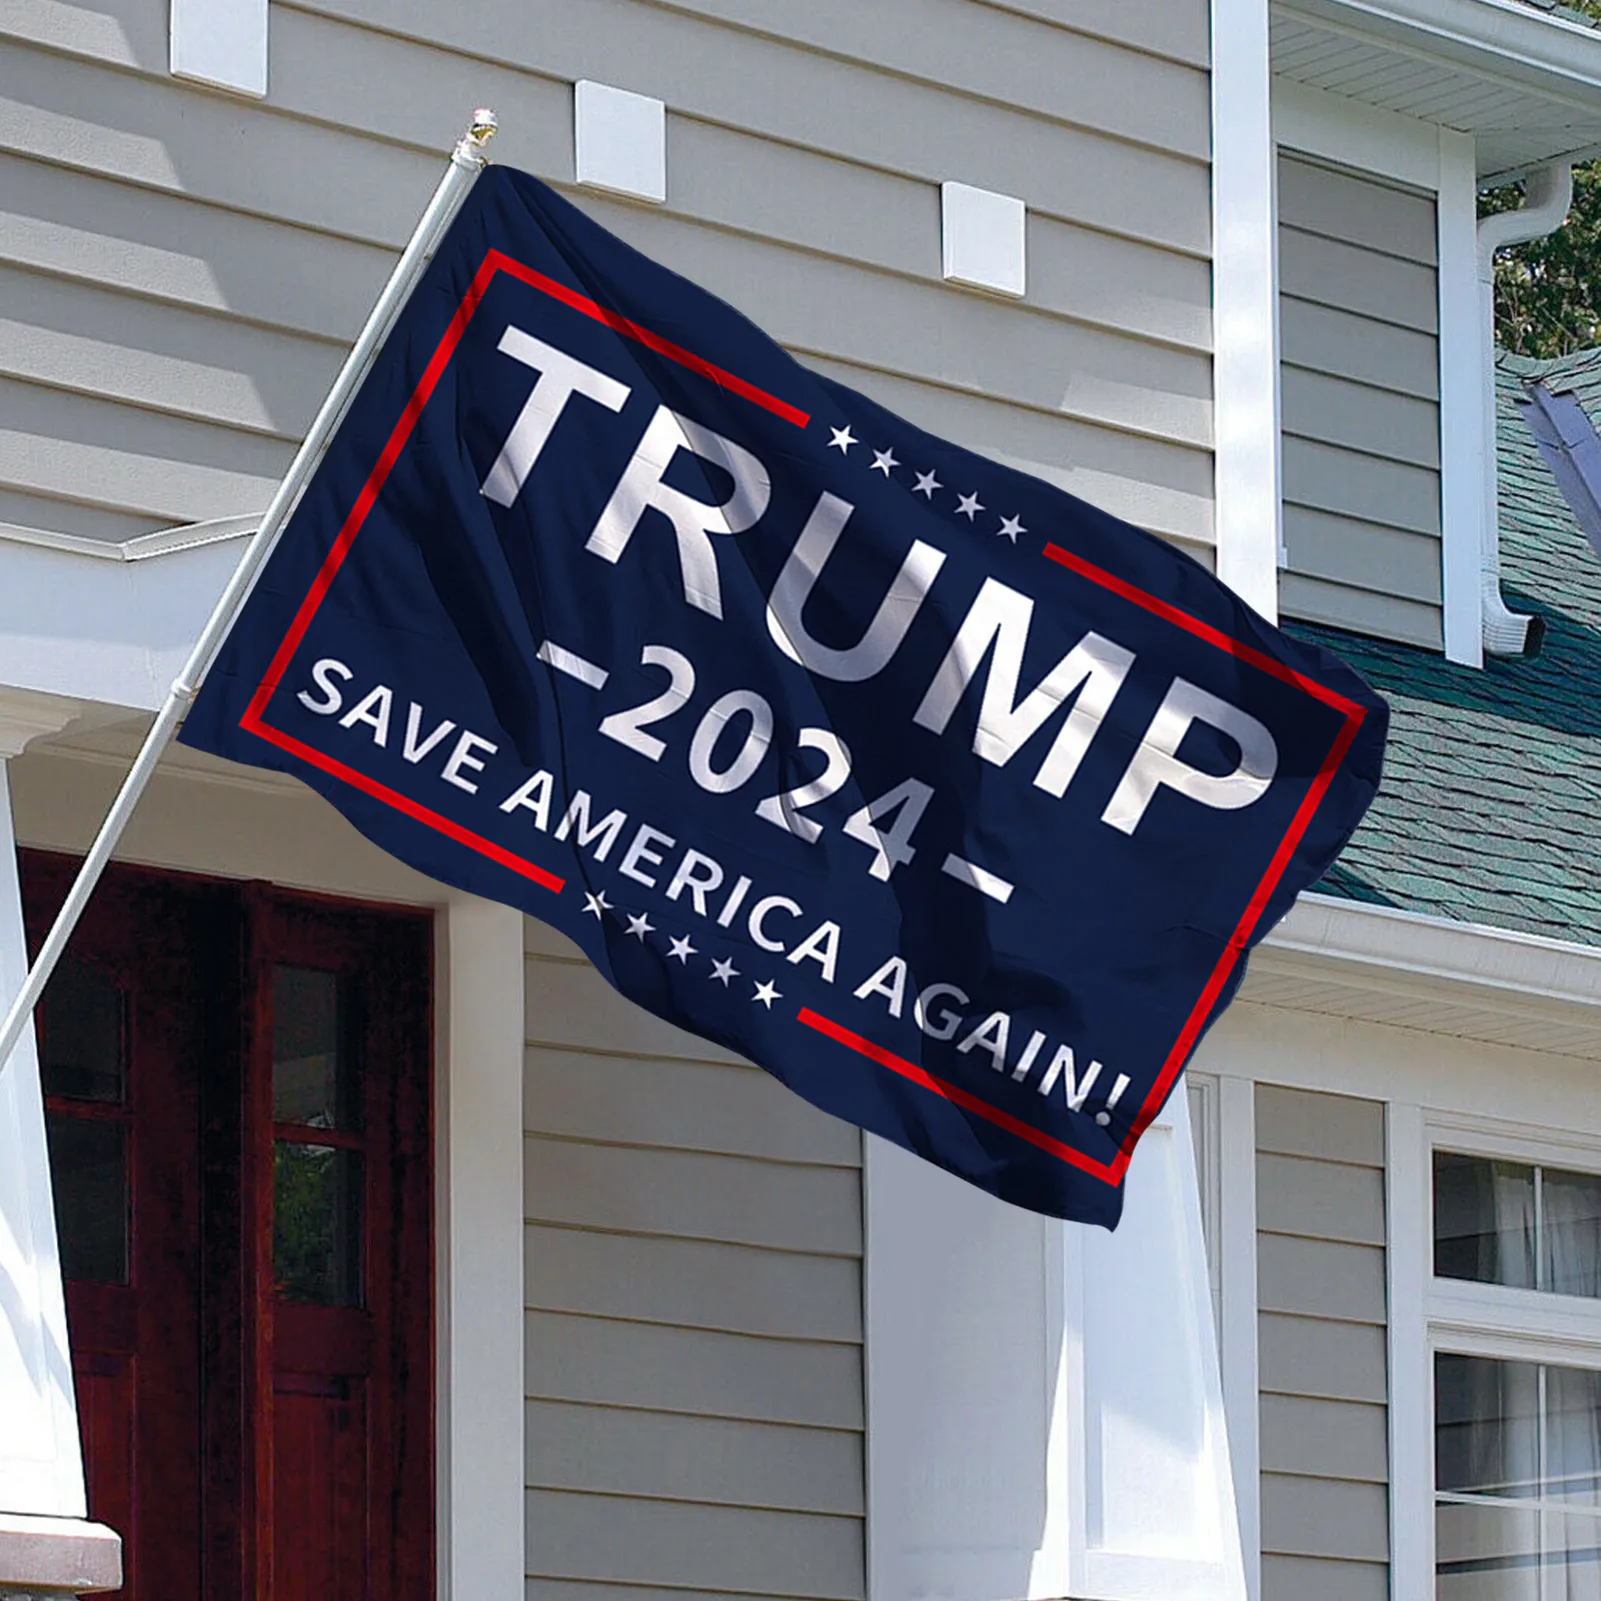 

3x5ft Donald Trump 2024 FlagSave America Again Take America Back Garden Flag Take America Back Outdoor Indoor Garden Banner With